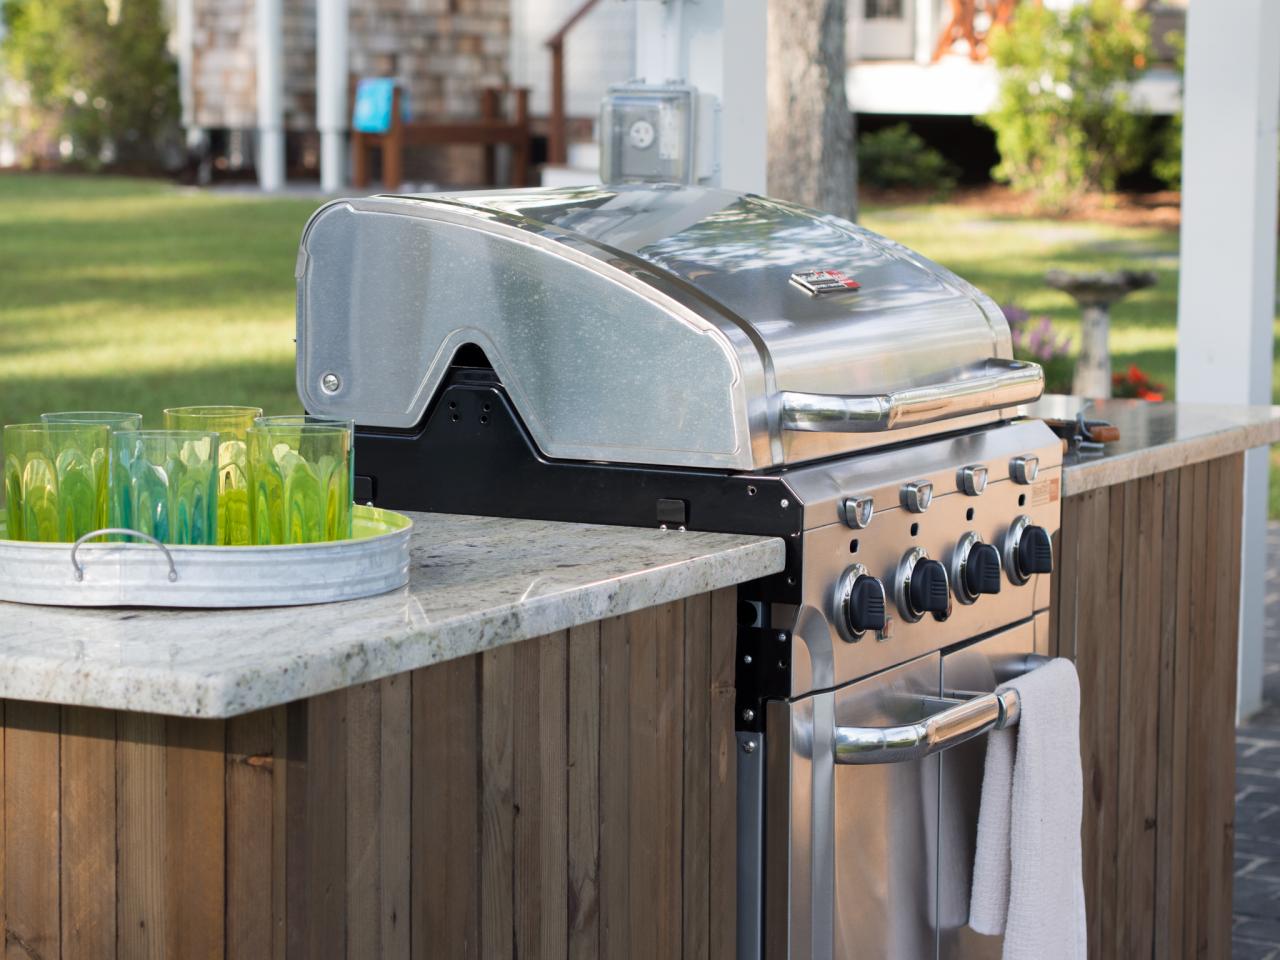 How To Build A Grilling Island, How To Build Your Own Outdoor Kitchen Island